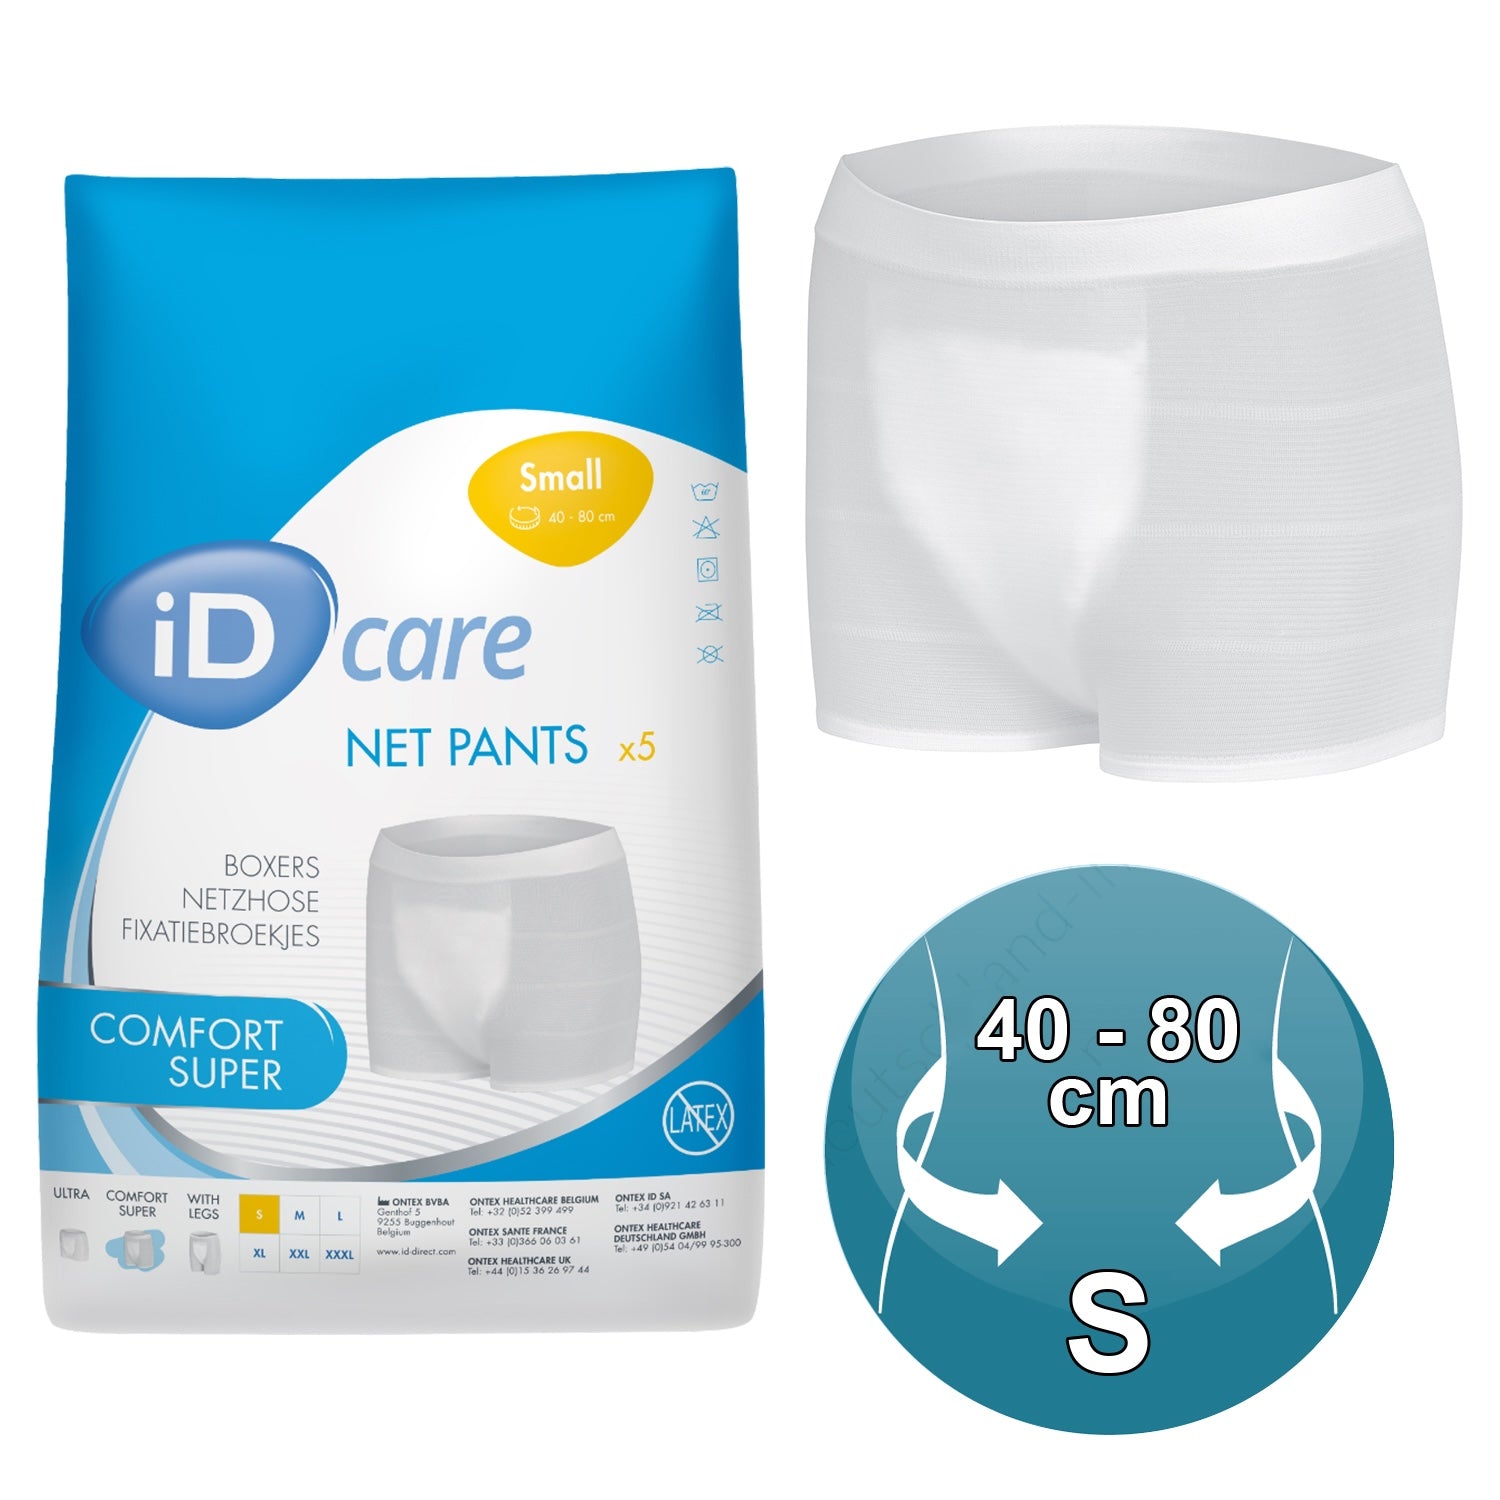 iD Care Net Pants Comfort Super | Small | Pack of 5 (2)